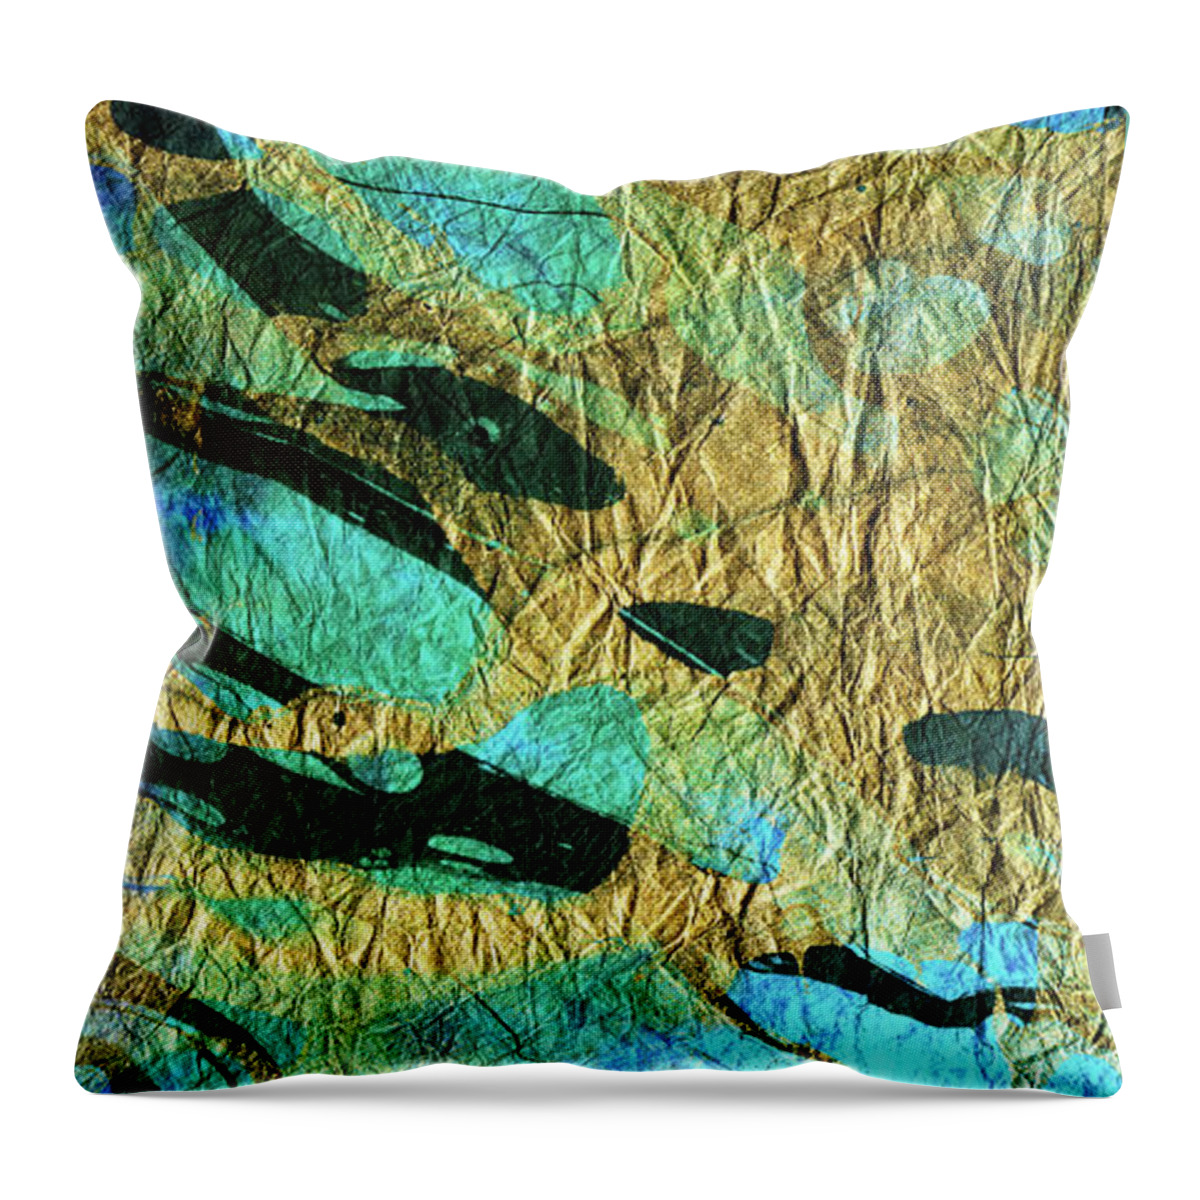 Abstract Throw Pillow featuring the painting Abstract Art - Deeper Visions 3 - Sharon Cummings by Sharon Cummings